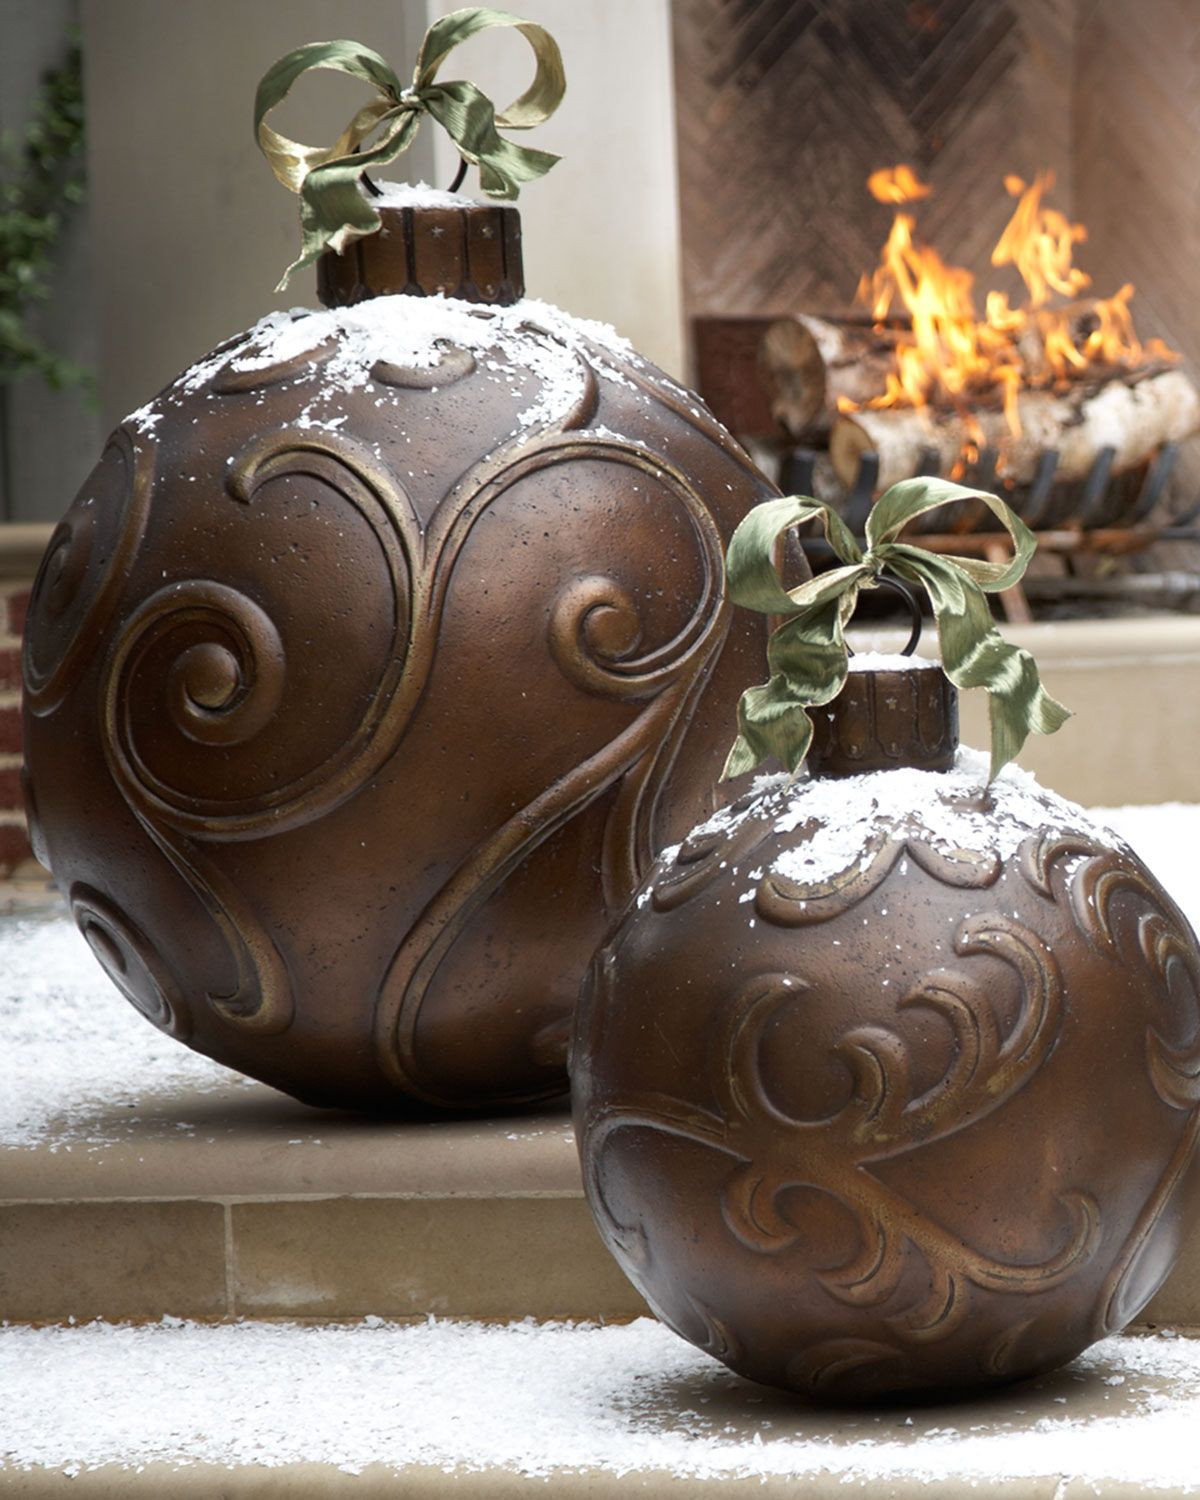 Outdoor Christmas Balls
 Cool Giant ball ornaments to enhance your outdoor